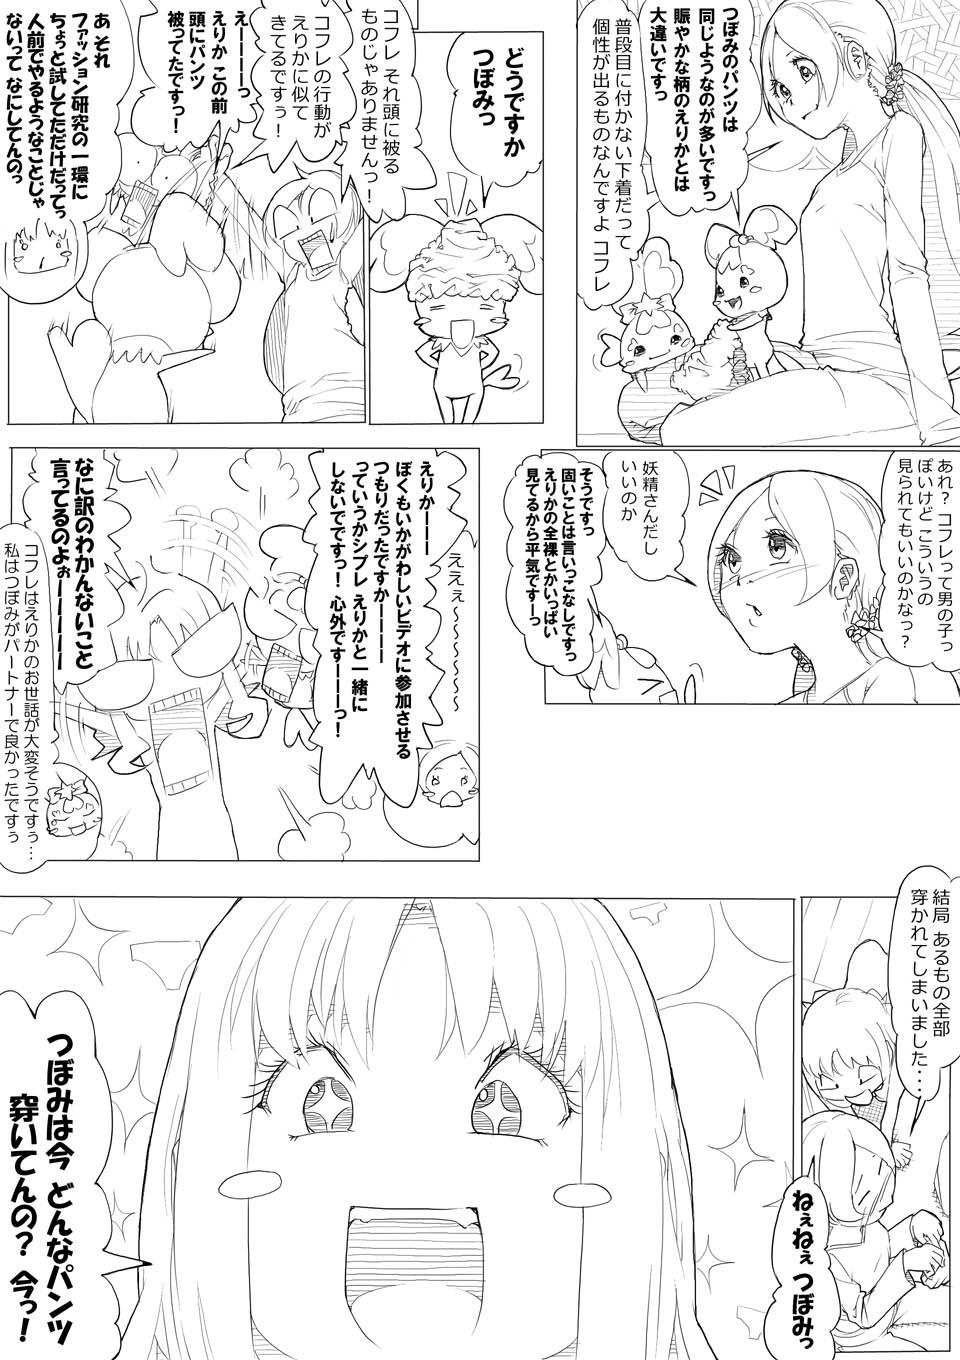 Playing ハトプリ - Heartcatch precure Exgirlfriend - Page 10